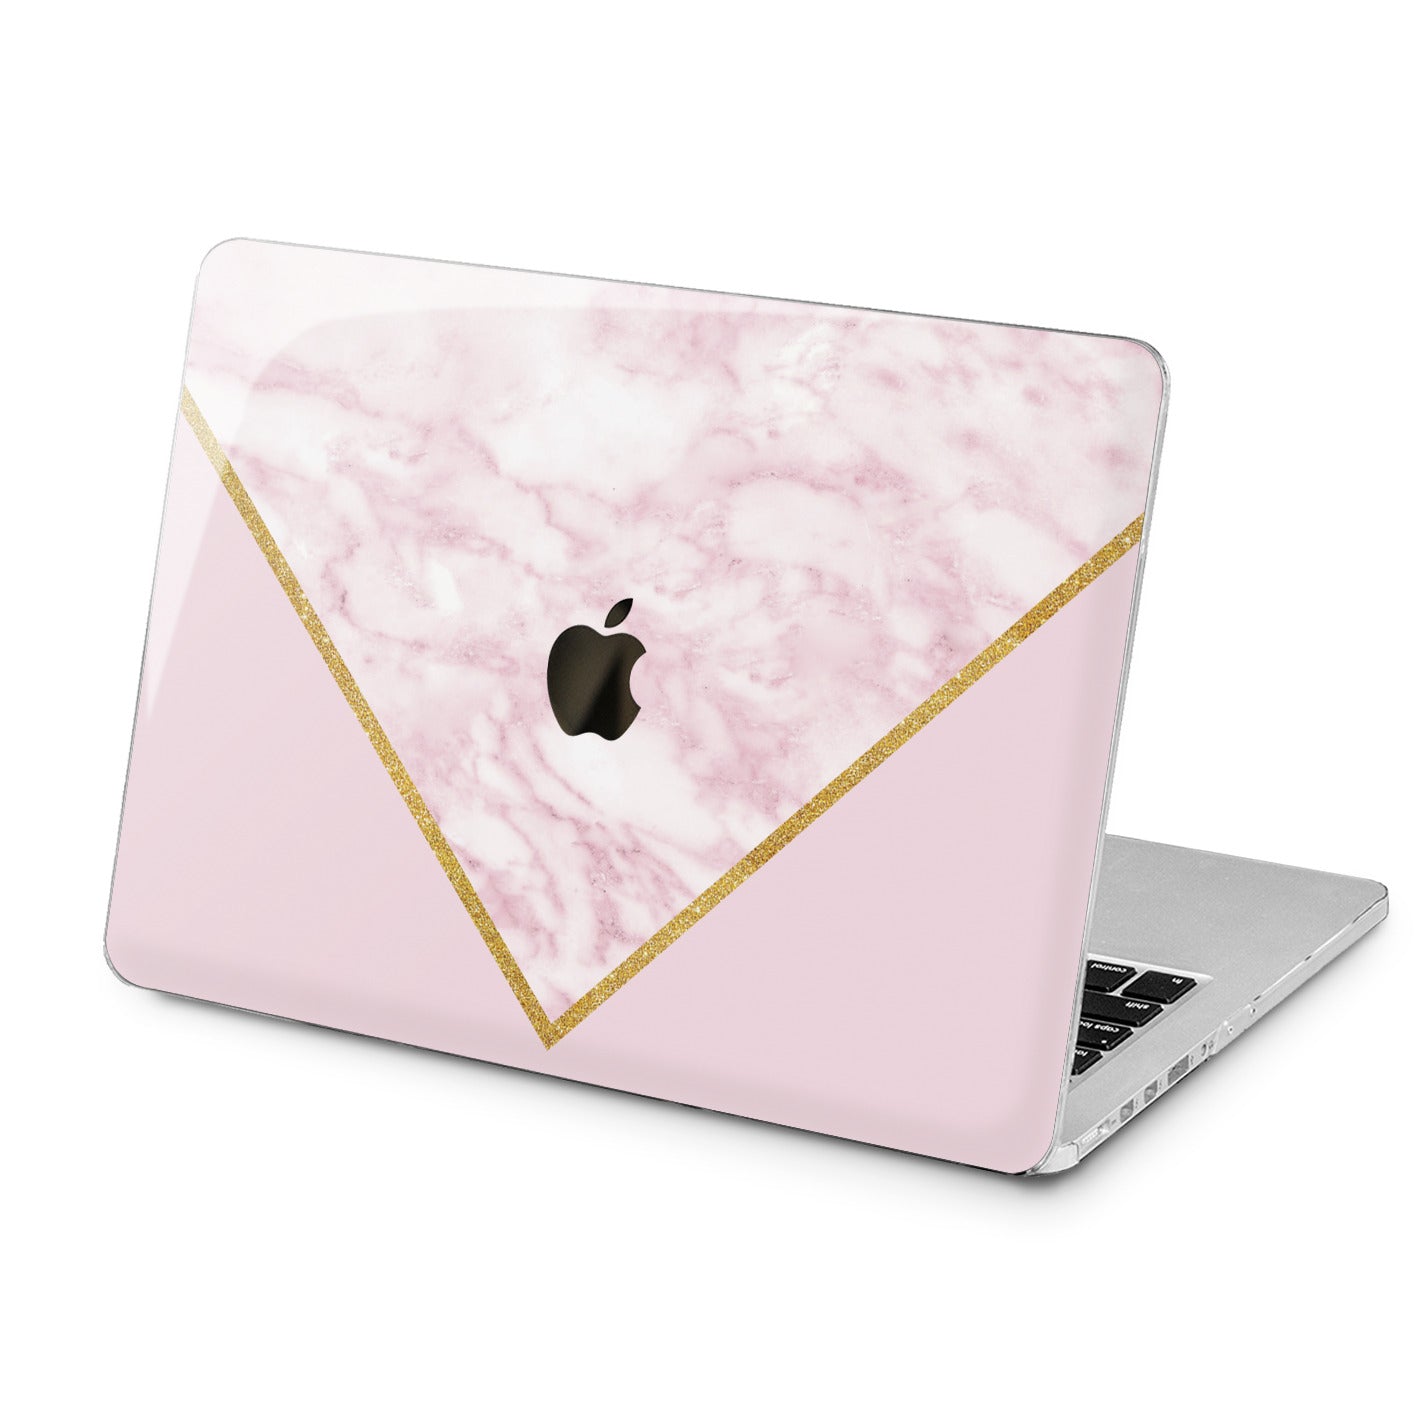 Lex Altern Triangle Marble Art Case for your Laptop Apple Macbook.